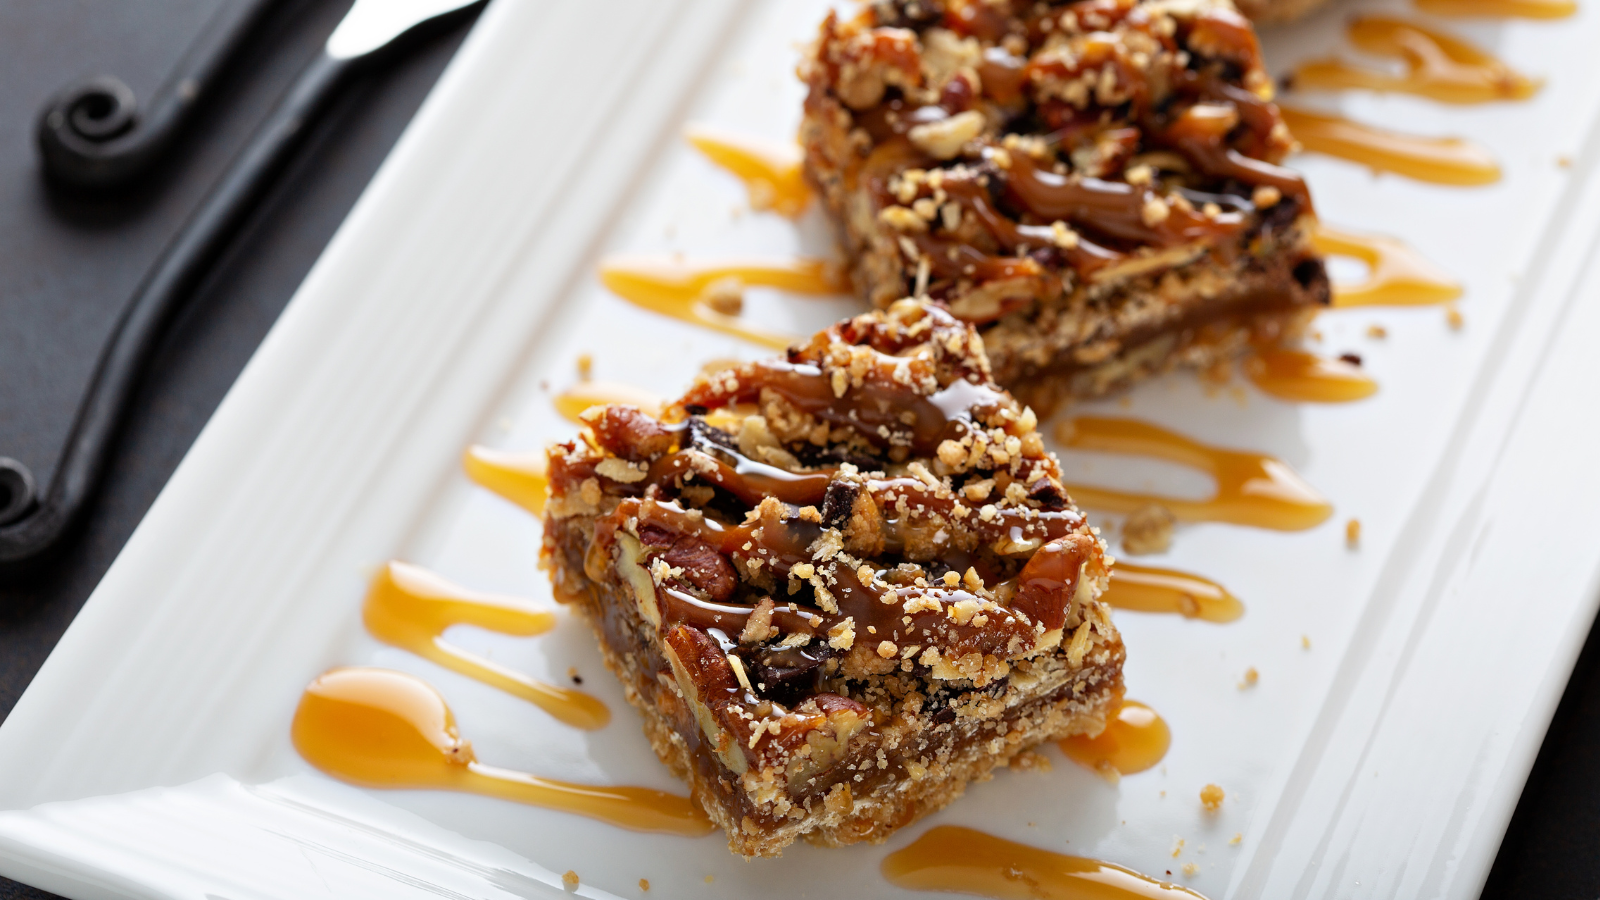 A long white porcelain plate is topped with two square Pecan Sandies that look gooey and sticky. The Pecan Sandies are placed on top of caramel drizzles covering the bottom of the dessert dish.